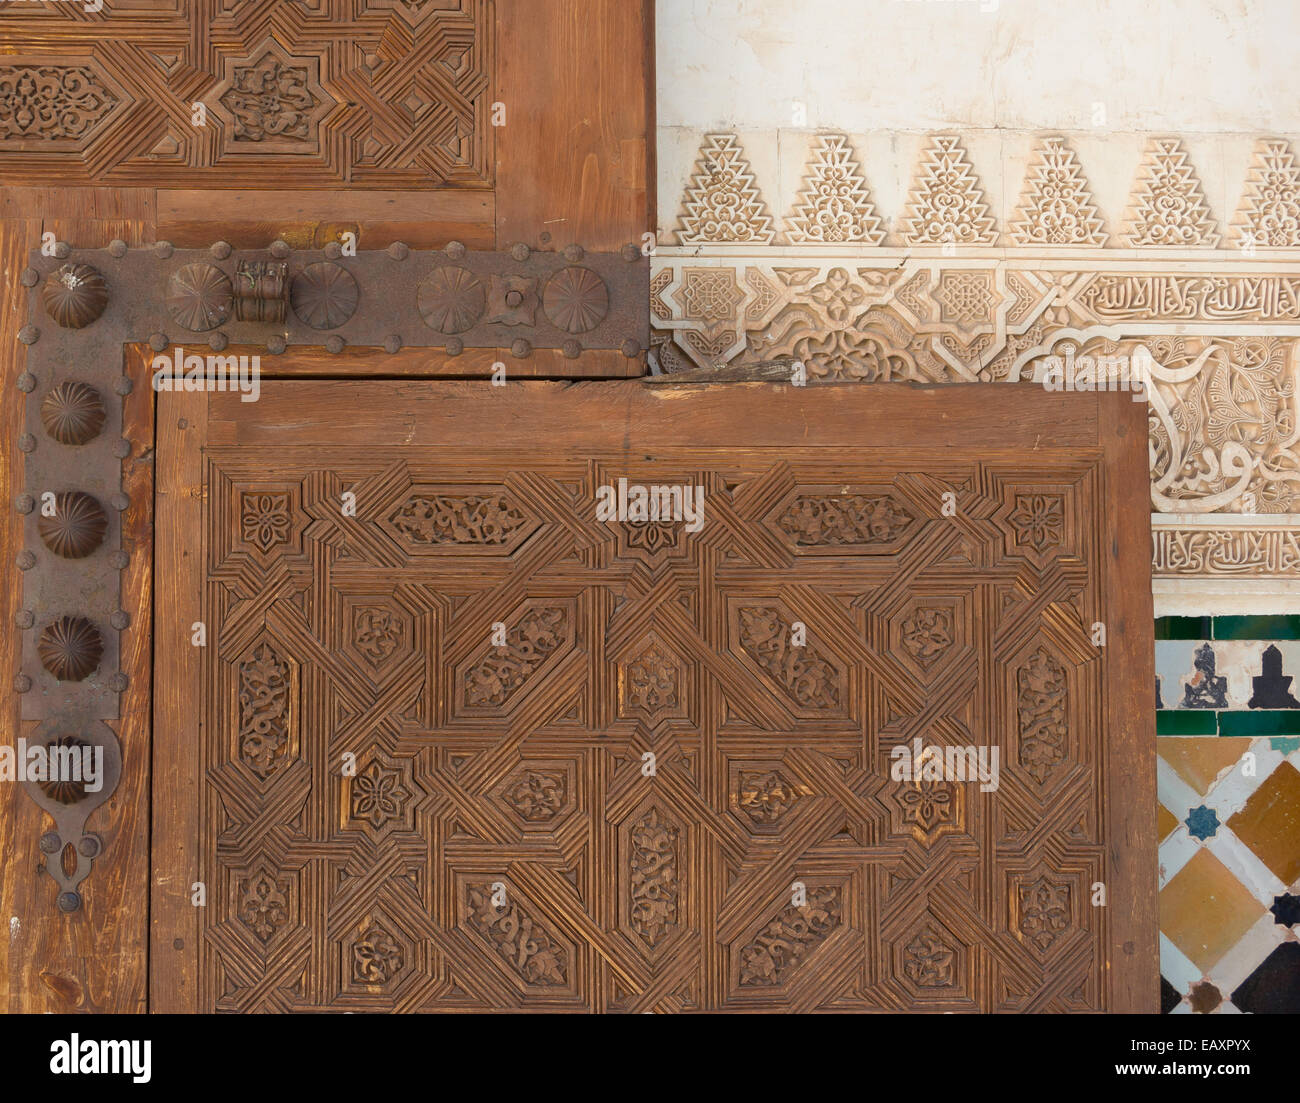 Stucco, wooden door, mosaics, wall in Alhambra, Granada, Andalusia, Spain Stock Photo